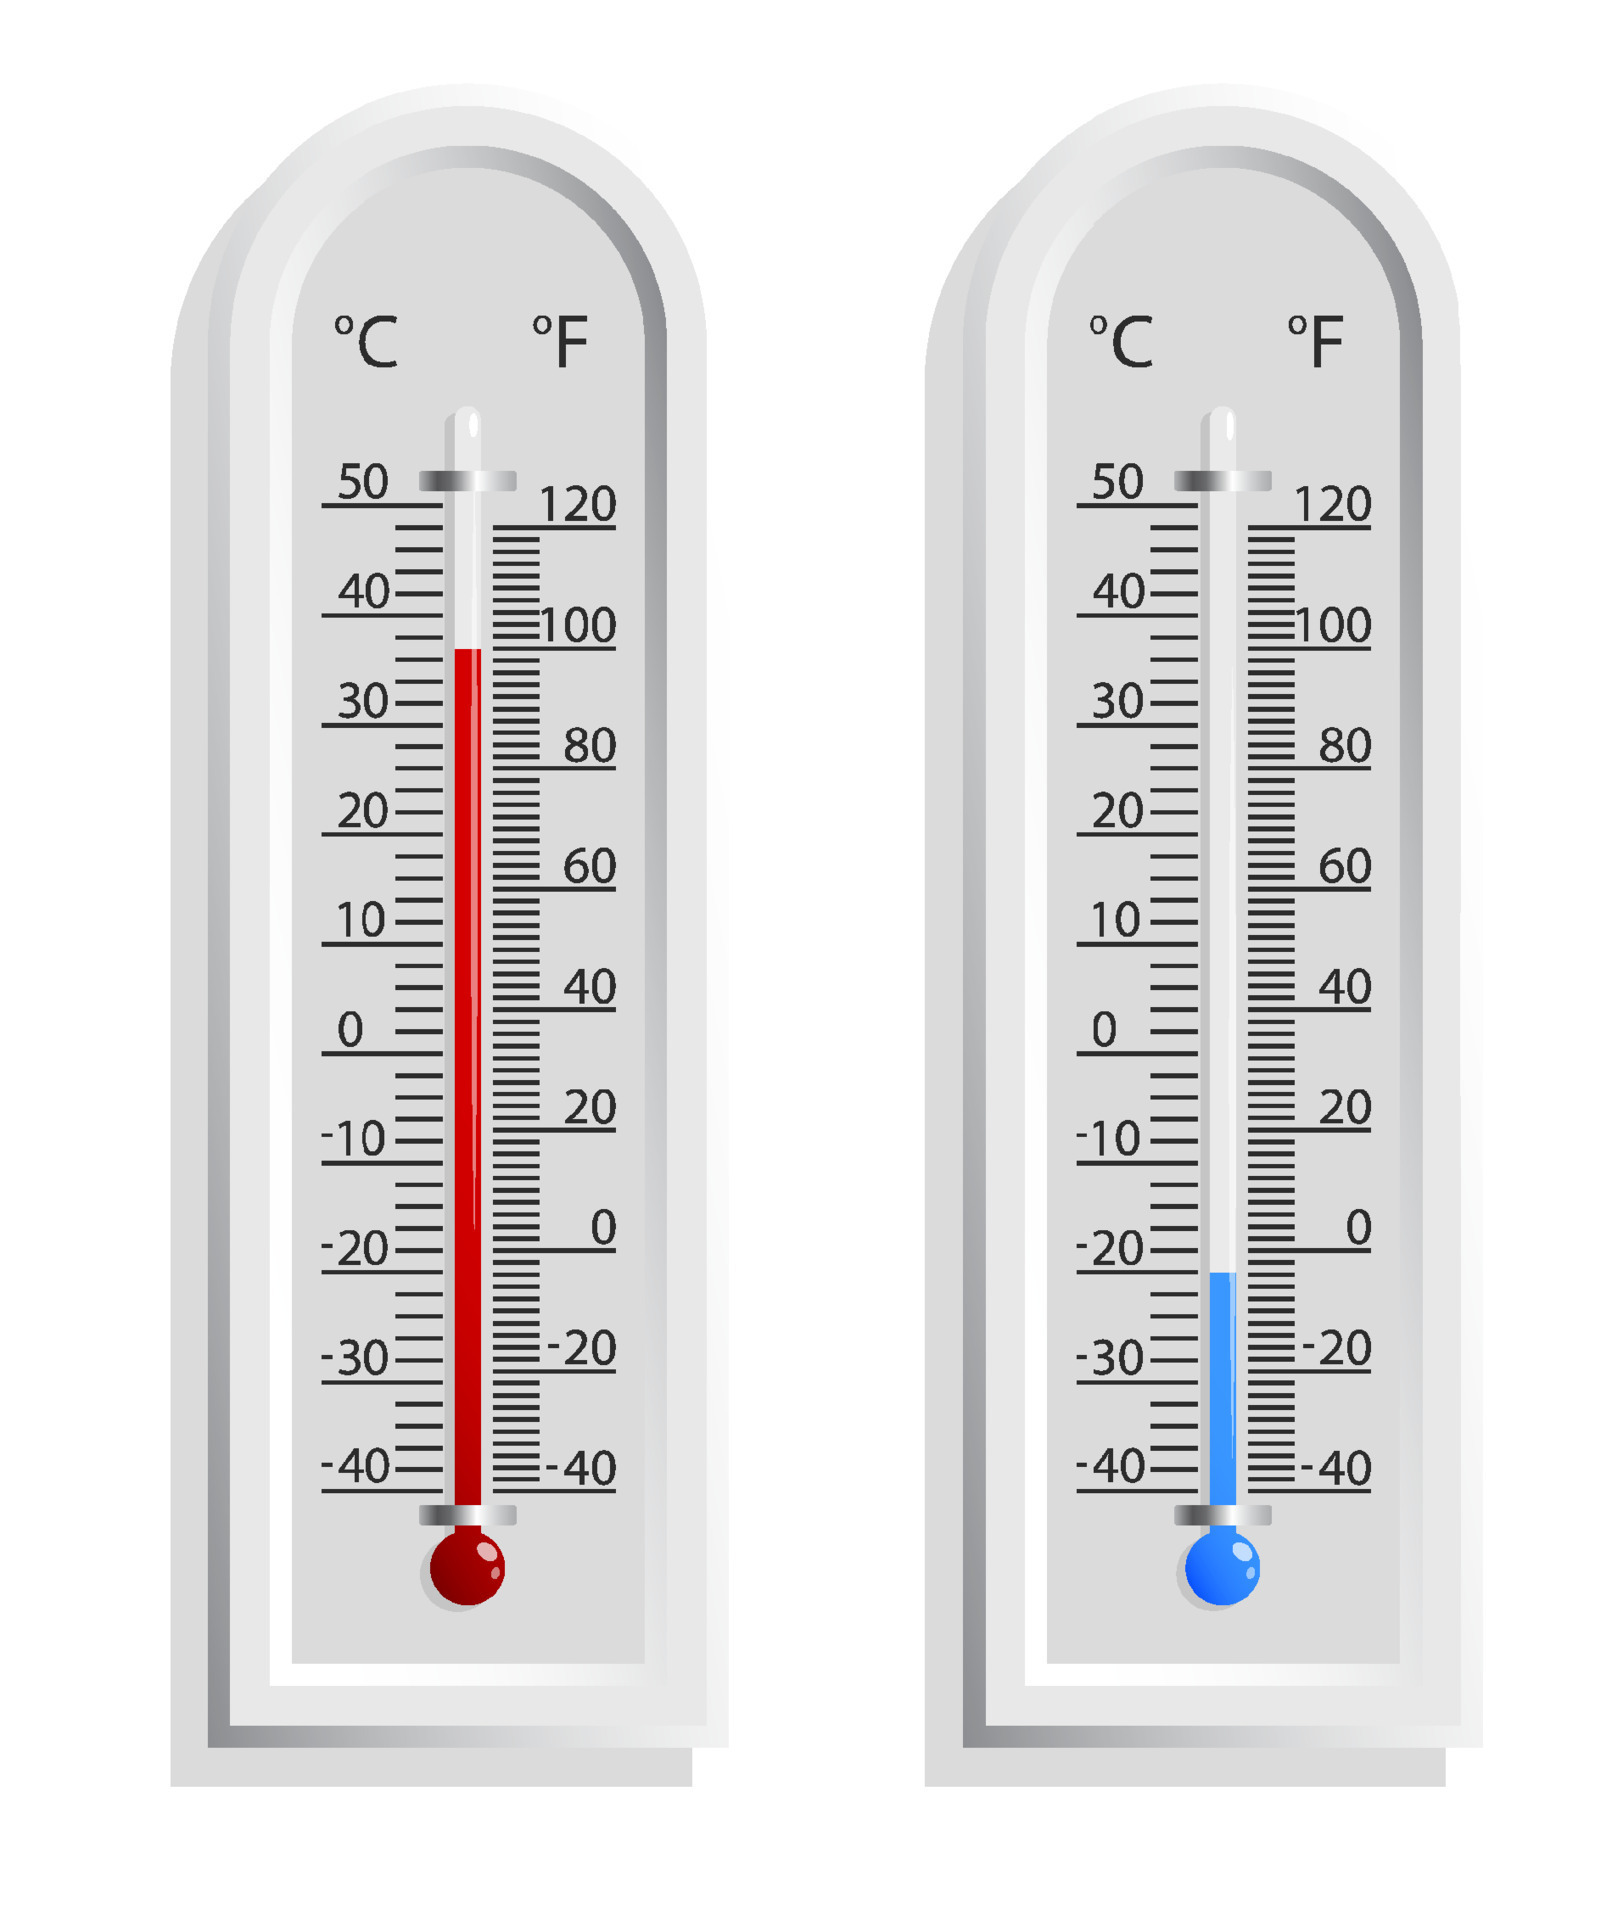 https://static.vecteezy.com/system/resources/previews/015/208/451/original/realistic-weather-thermometer-with-high-and-low-temperature-outdoor-temperature-measurement-isolated-on-white-background-vector.jpg